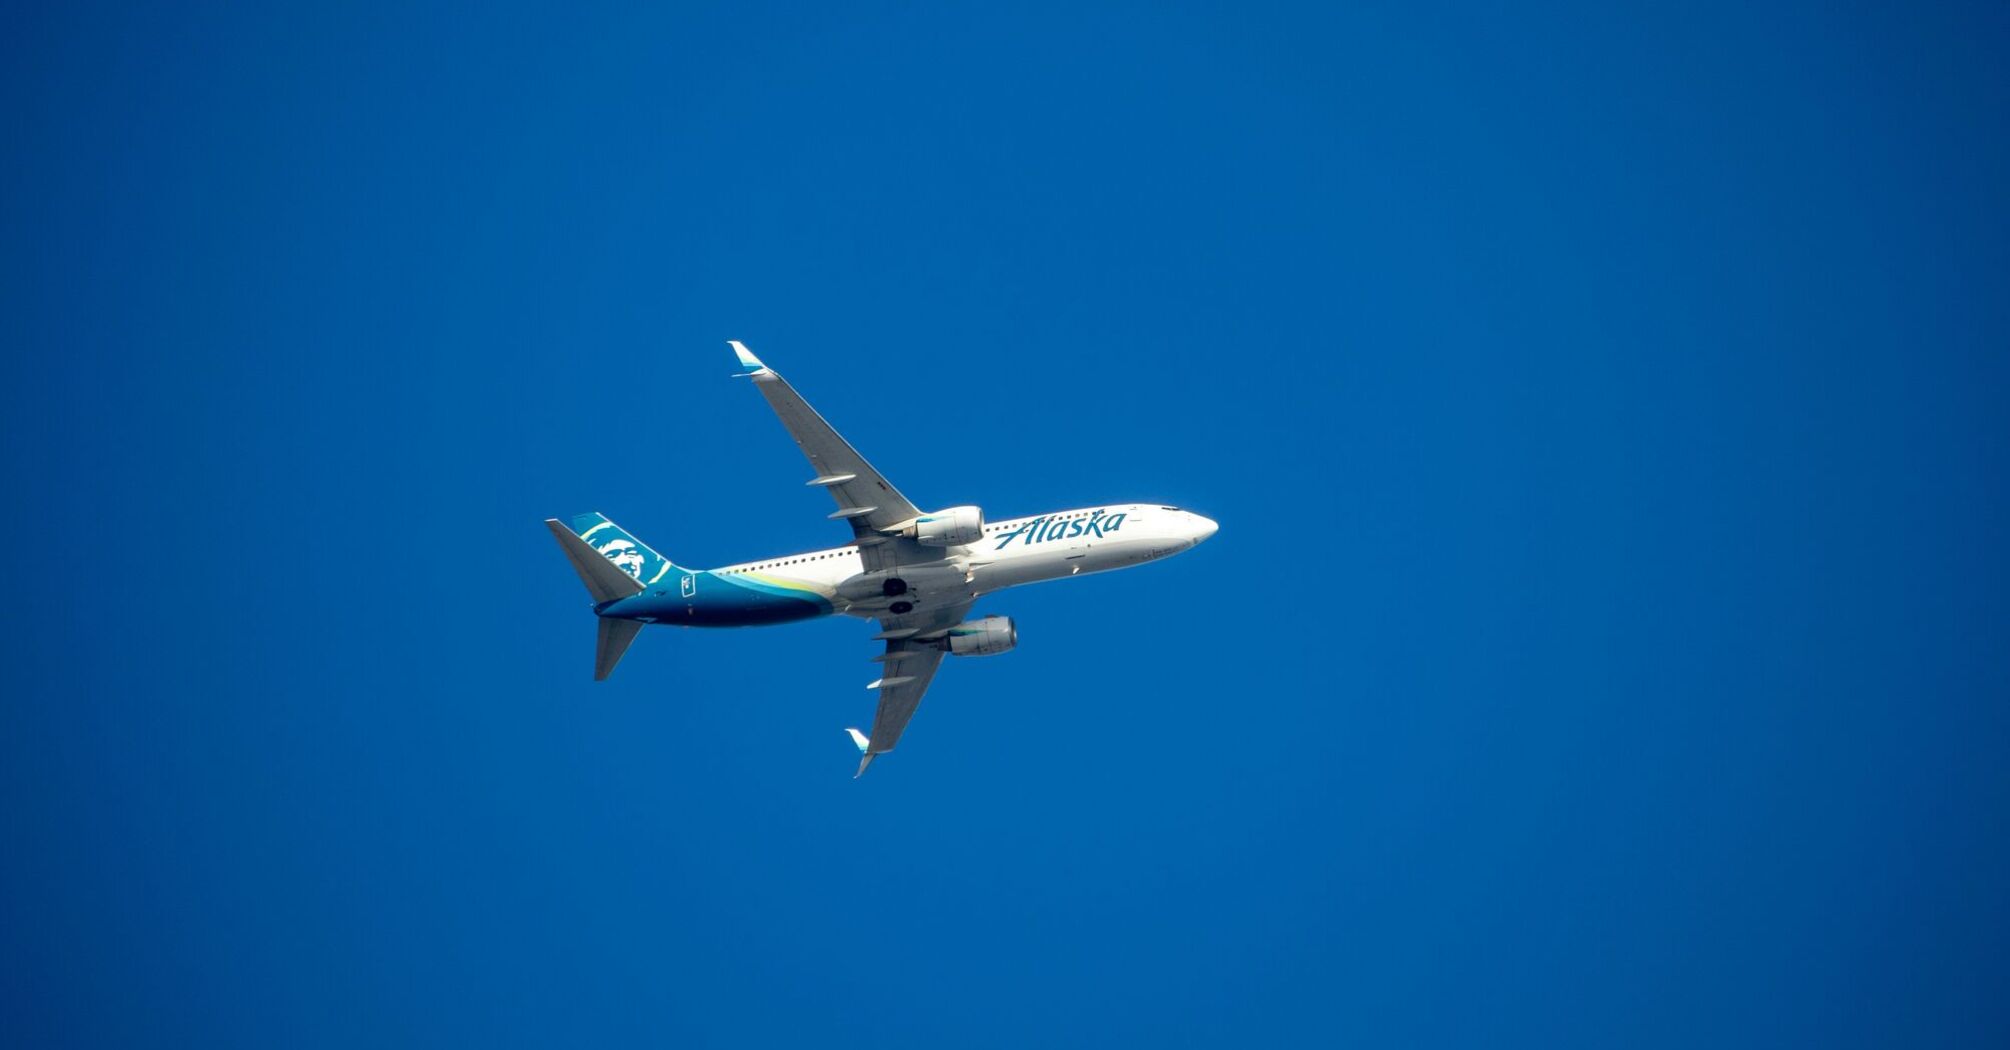 A blue and white Alaska Airlines airplane flying in a blue sky